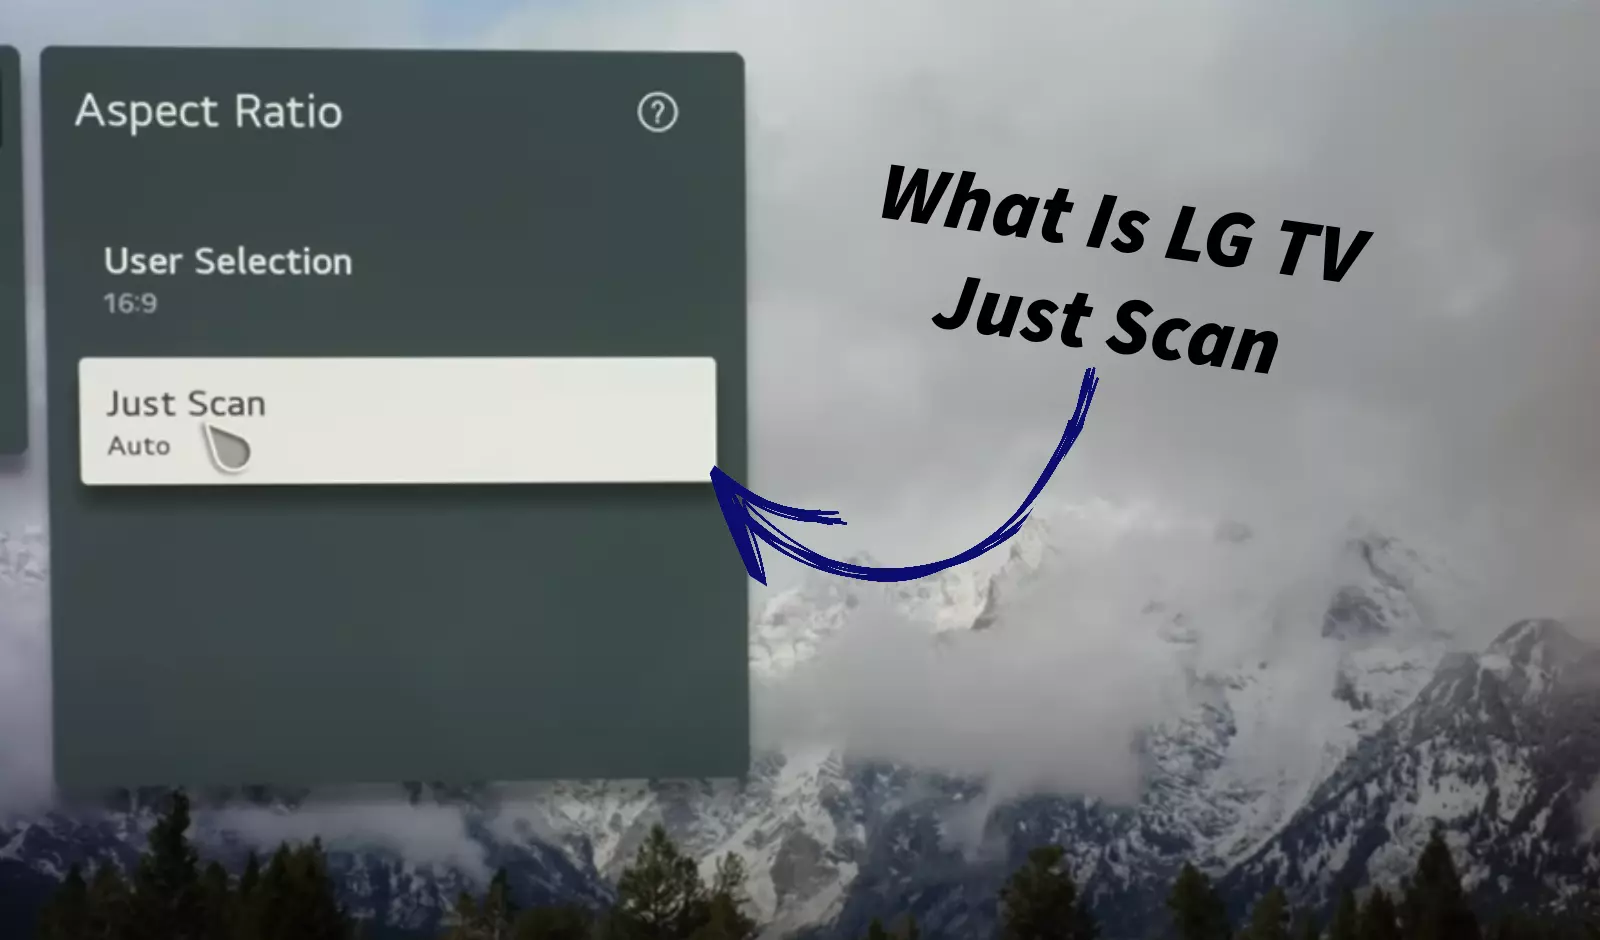 LG TV Just Scan